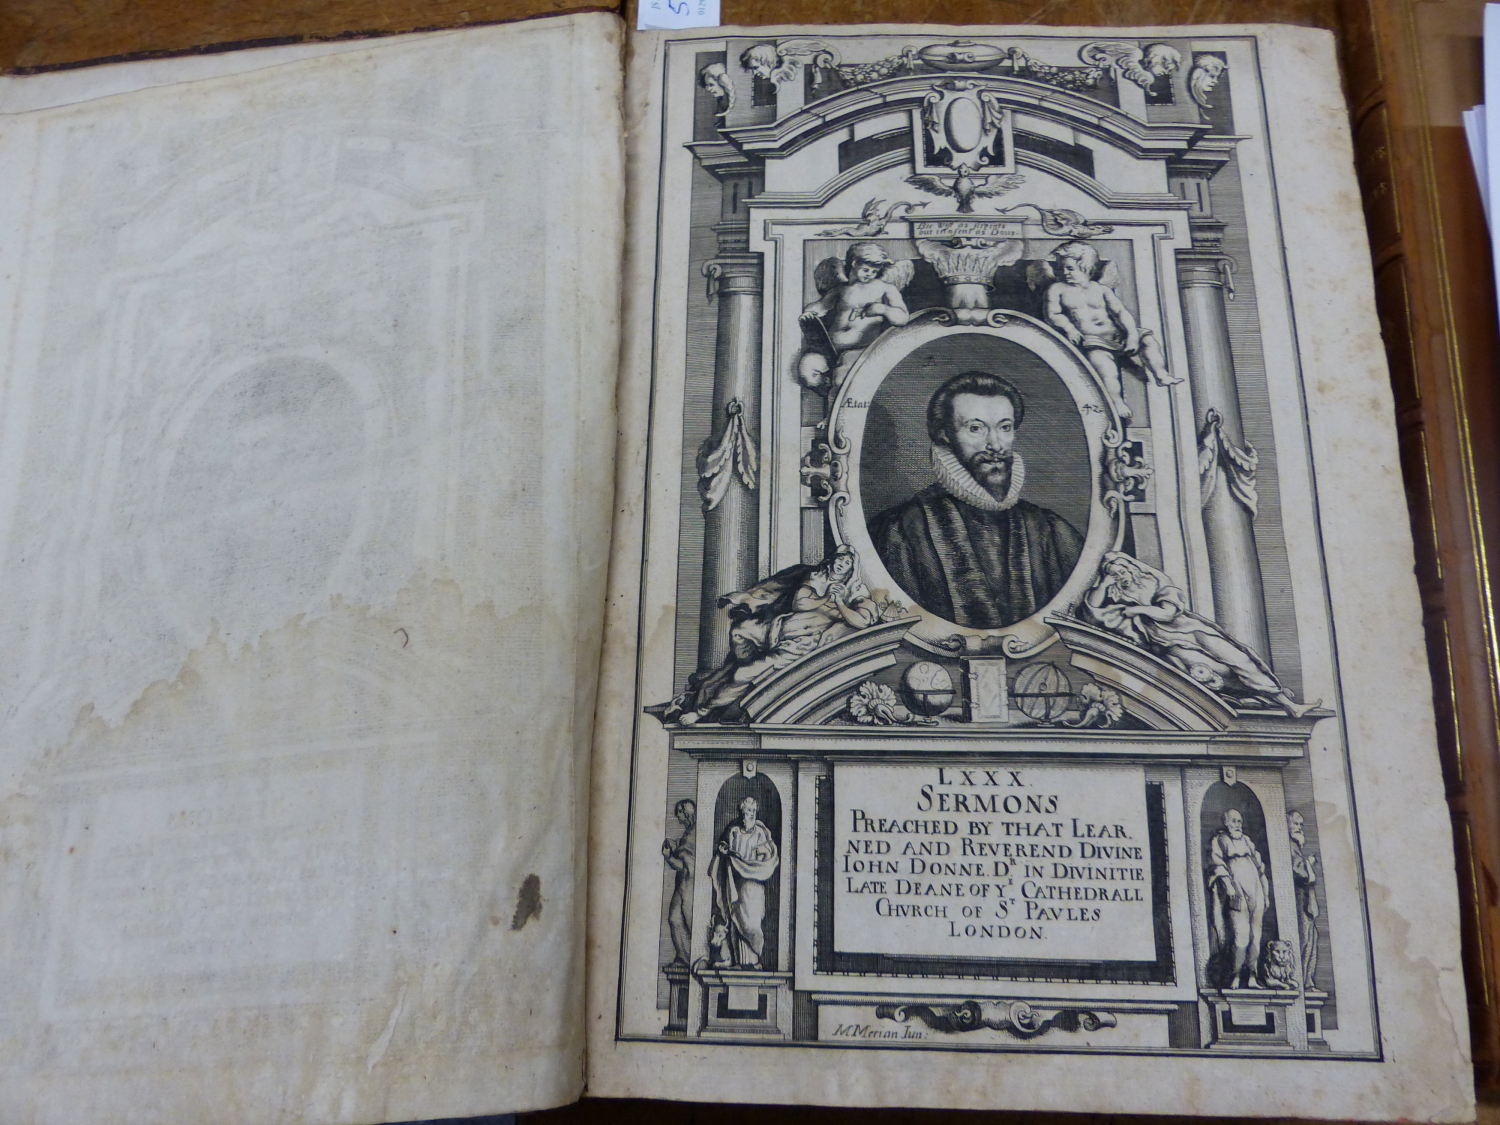 BOOK-LXXX SERMONS PREACHED BY THAT LEARNED AND REVEREND DIVINE. JOHN DONNE PUBLISHED BY PRINTED [ - Image 11 of 14